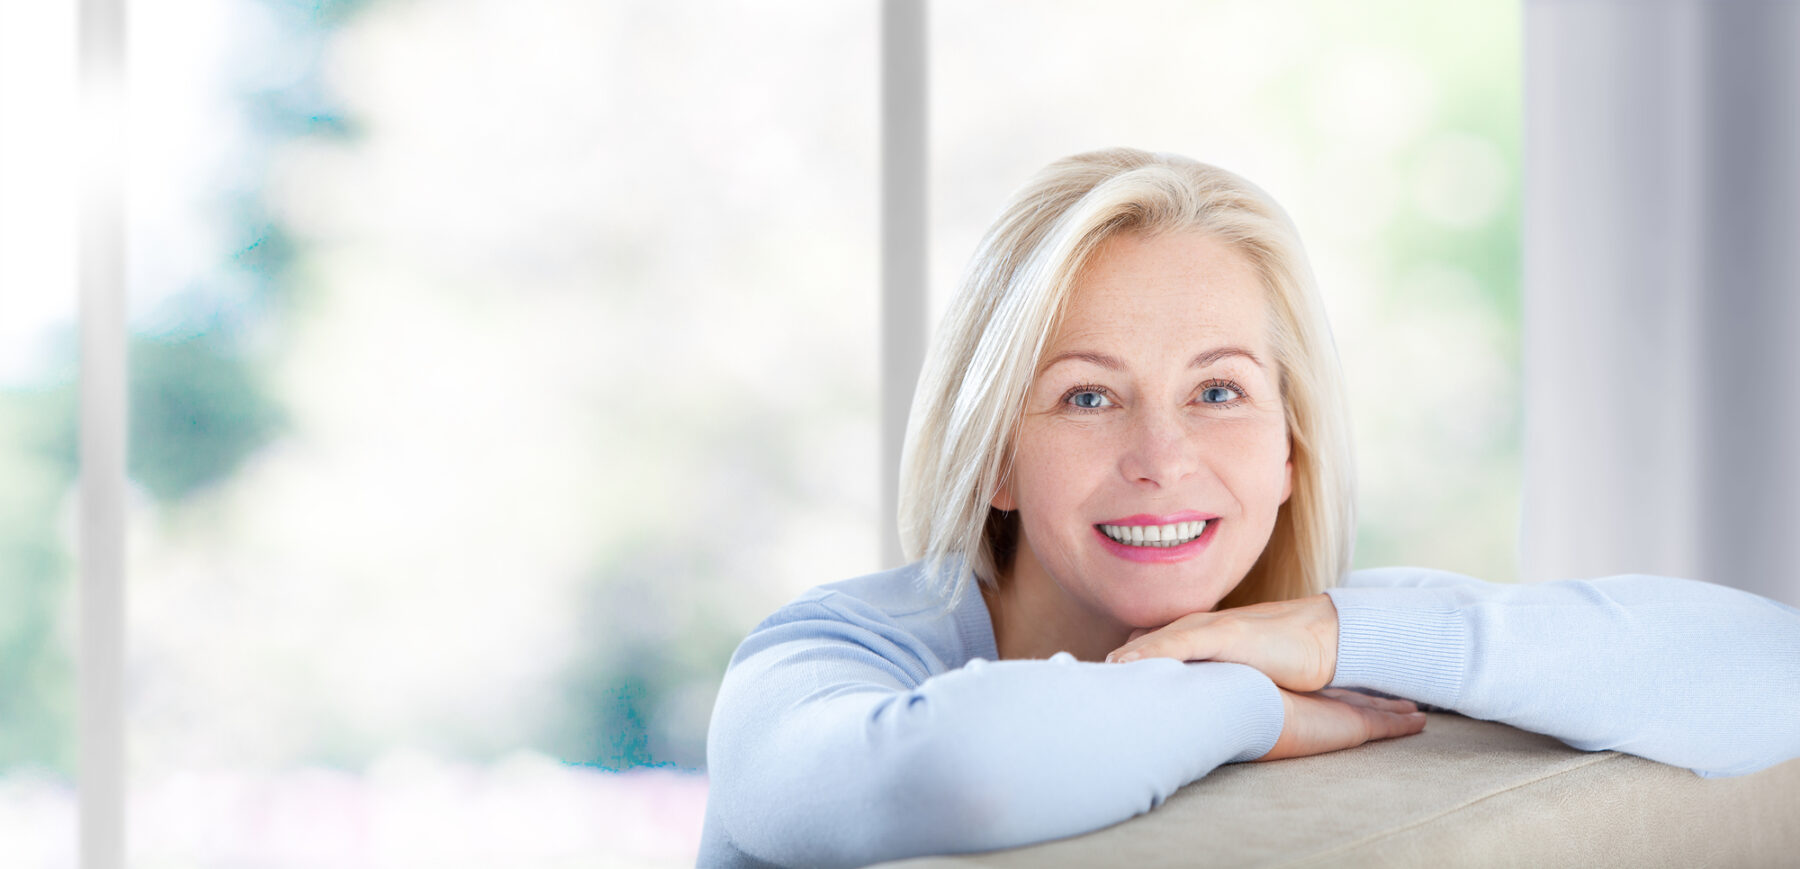 Middle Age attractive woman smiling